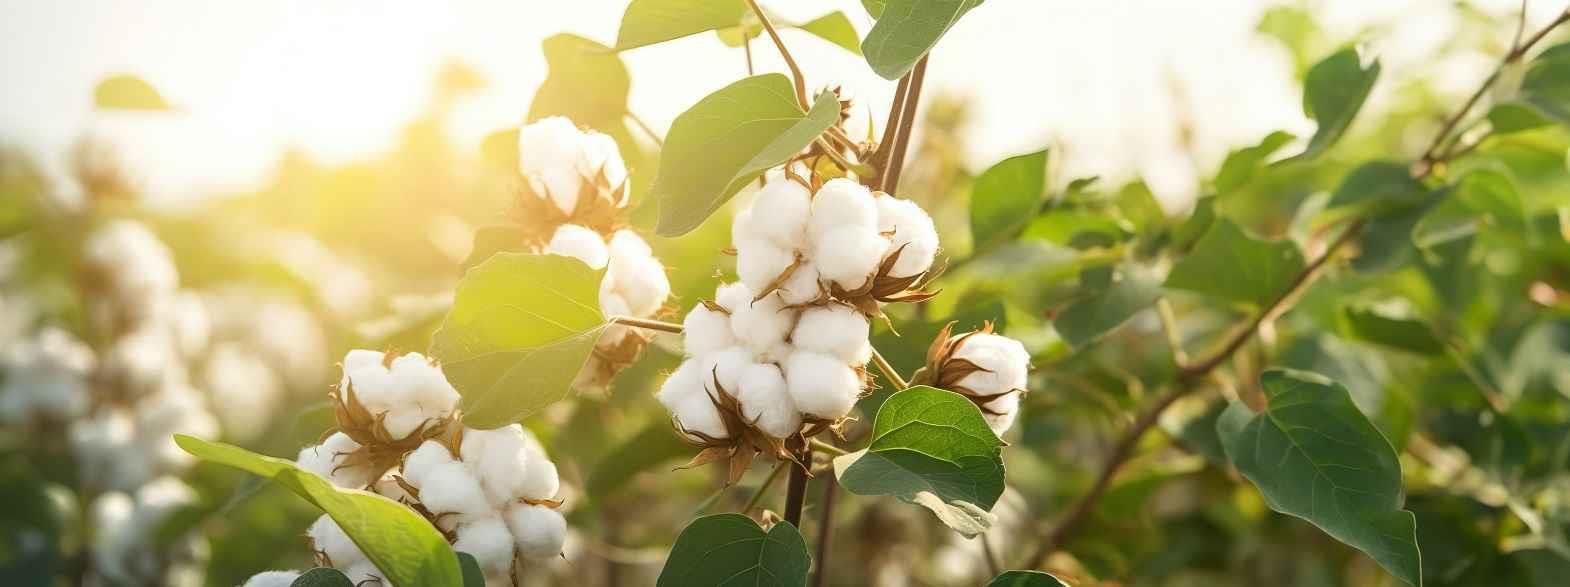 Kasturi cotton: India’s White Gold with a Green Heart